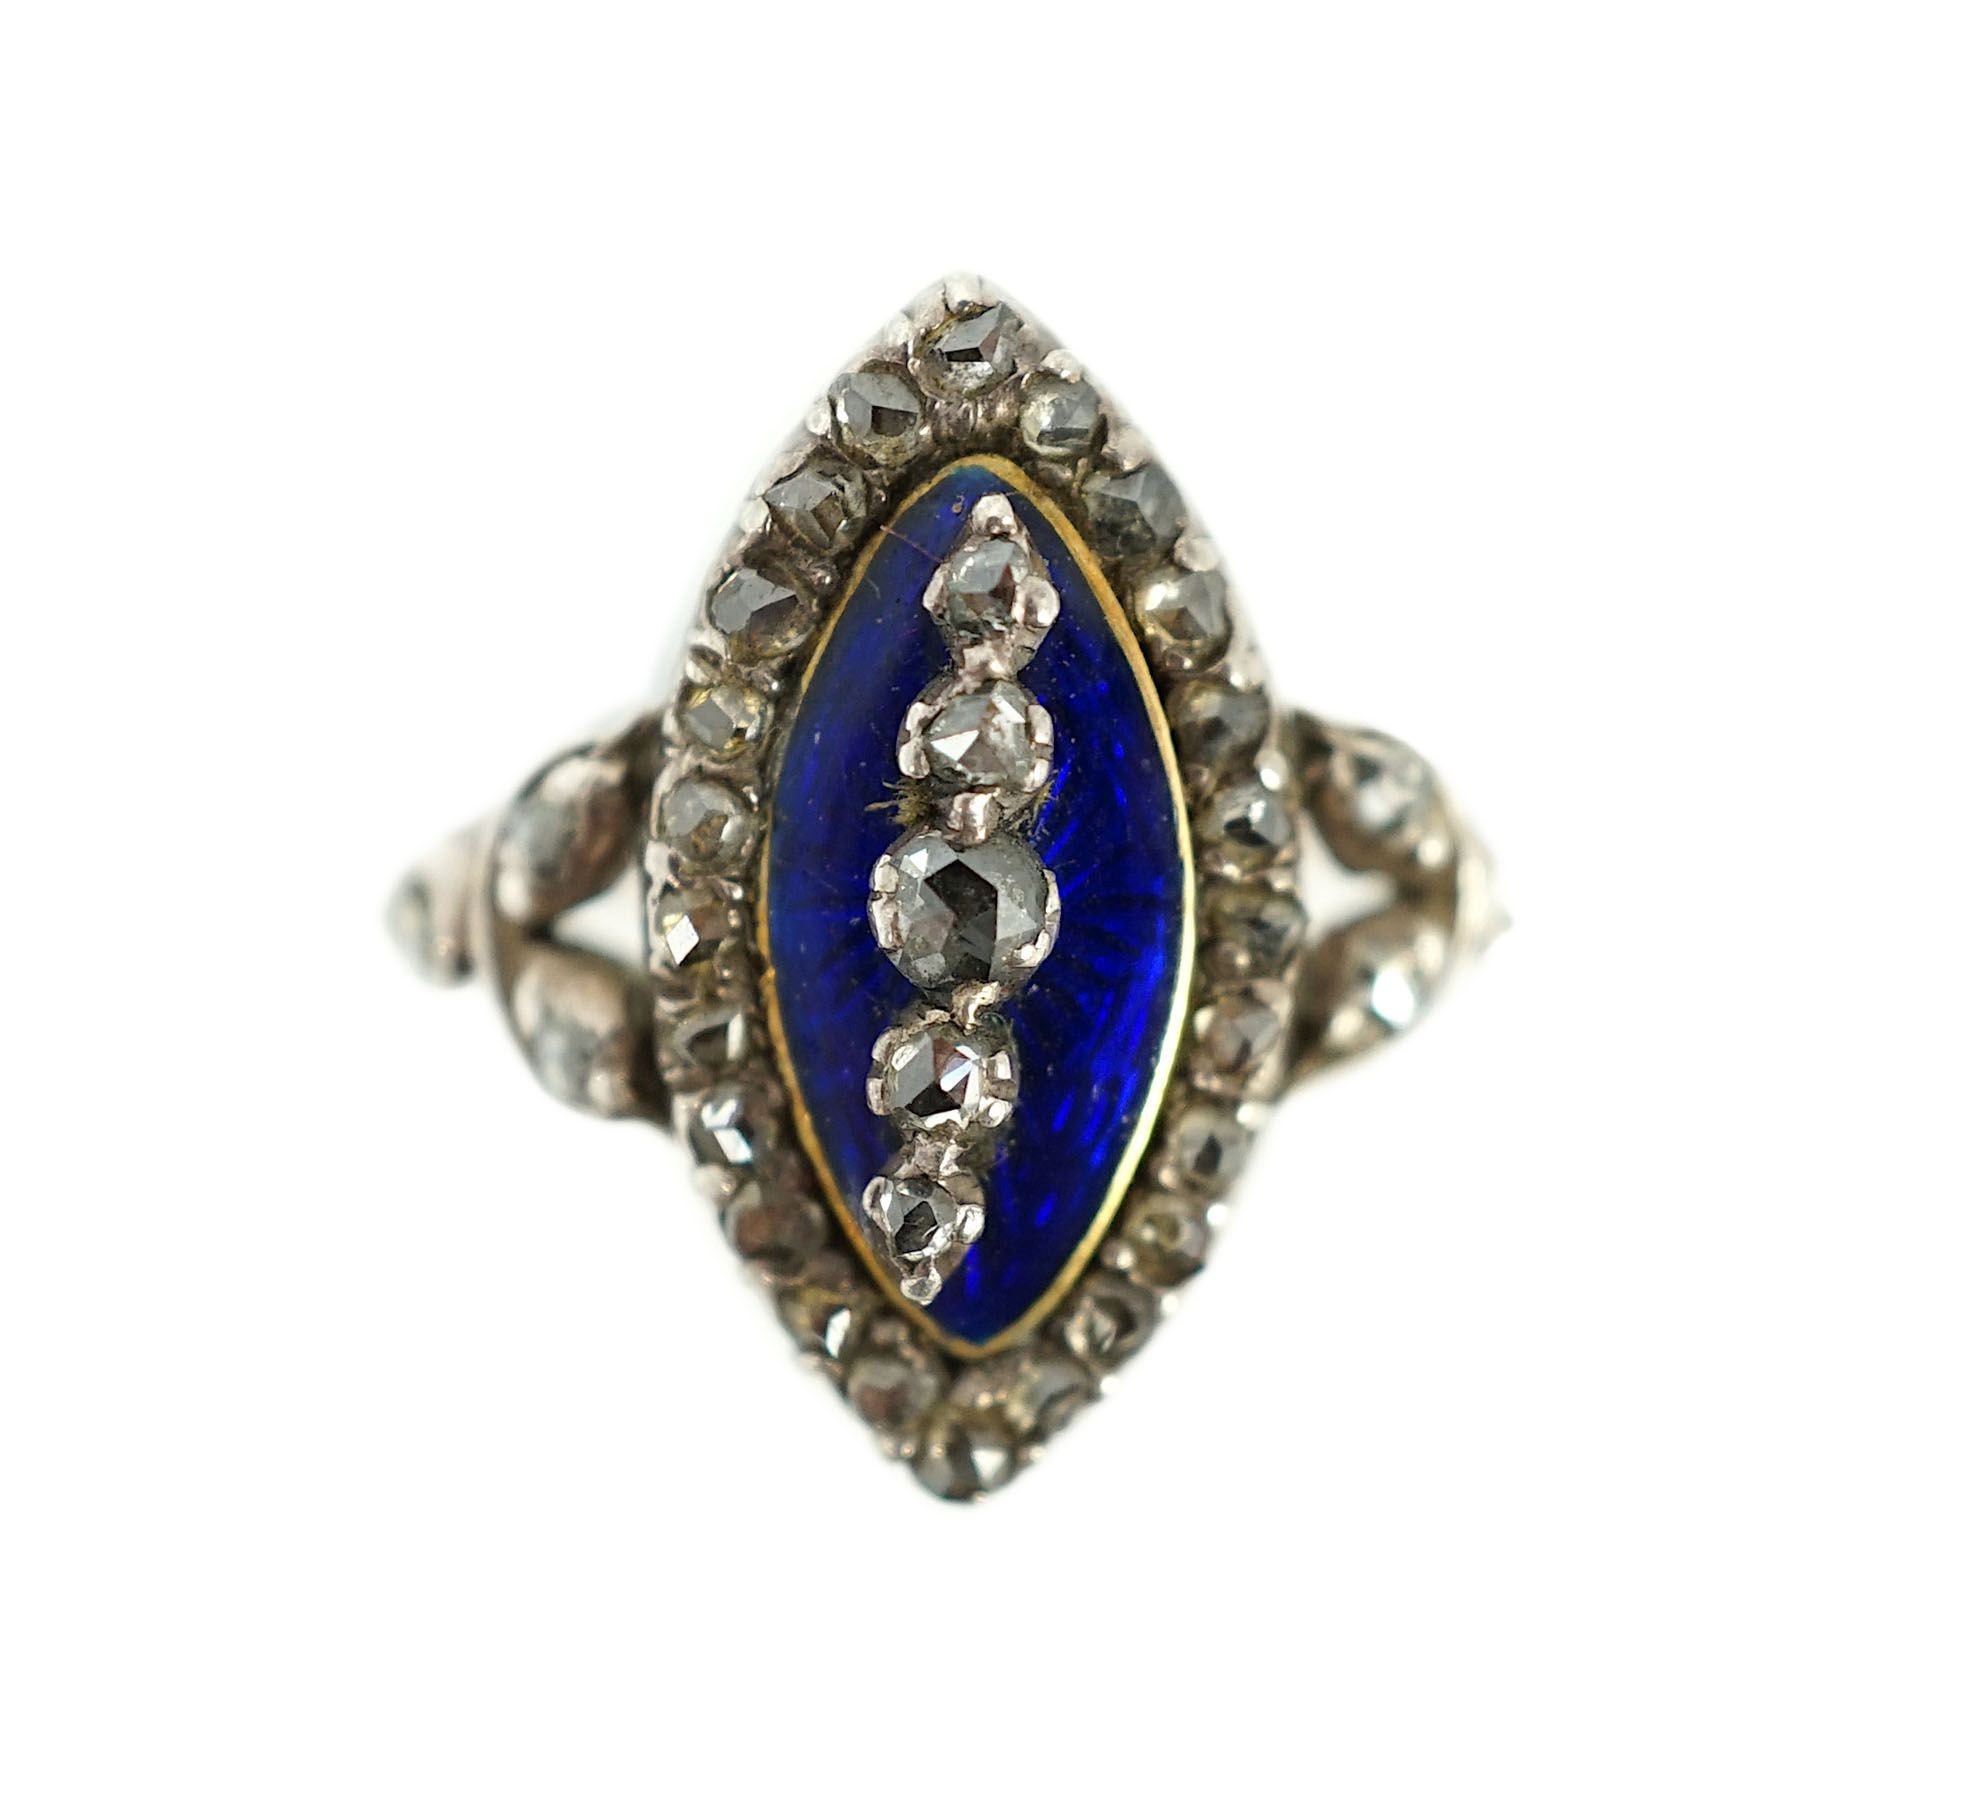 An 19th century gold, rose cut diamond and blue guilloche enamel set marquise shaped ring                                                                                                                                   